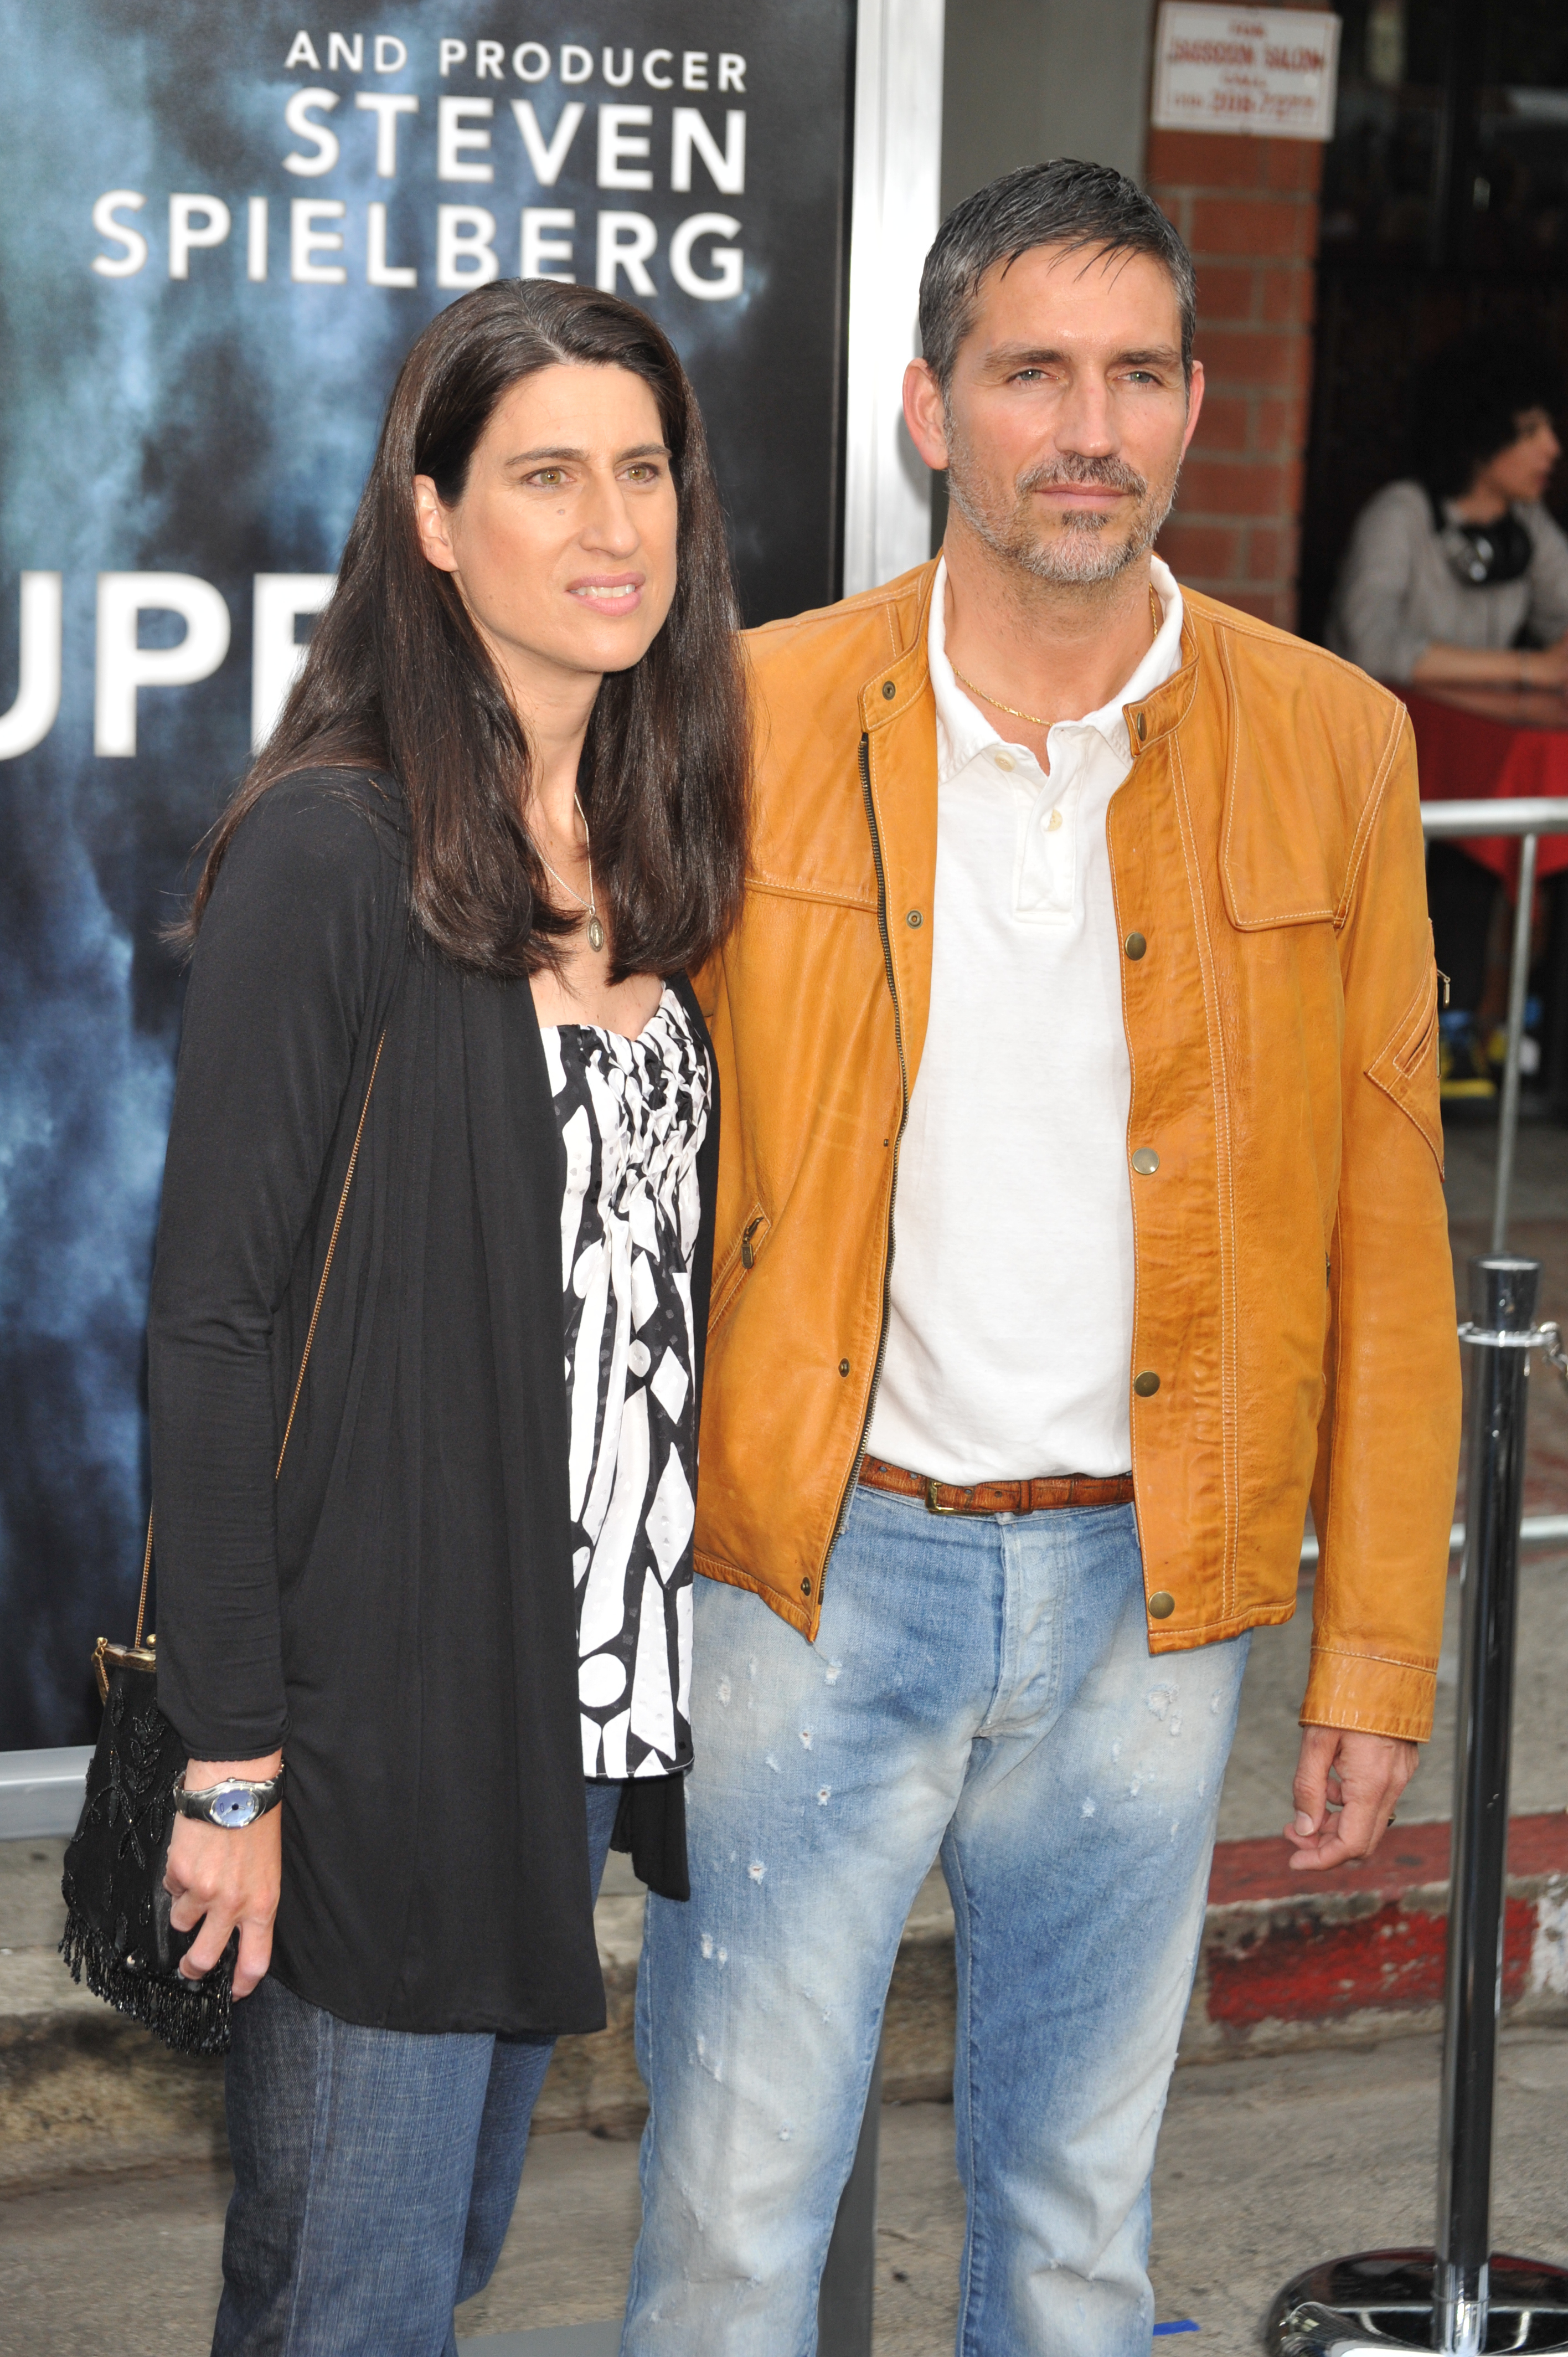 Jim Caviezal and his wife Kerri Browitt Caviezel arrive at the Premiere of Paramount Pictures' "Super 8" held at the Regency Village Theater in June 2011 in Westwood, California. | Source: Getty Images